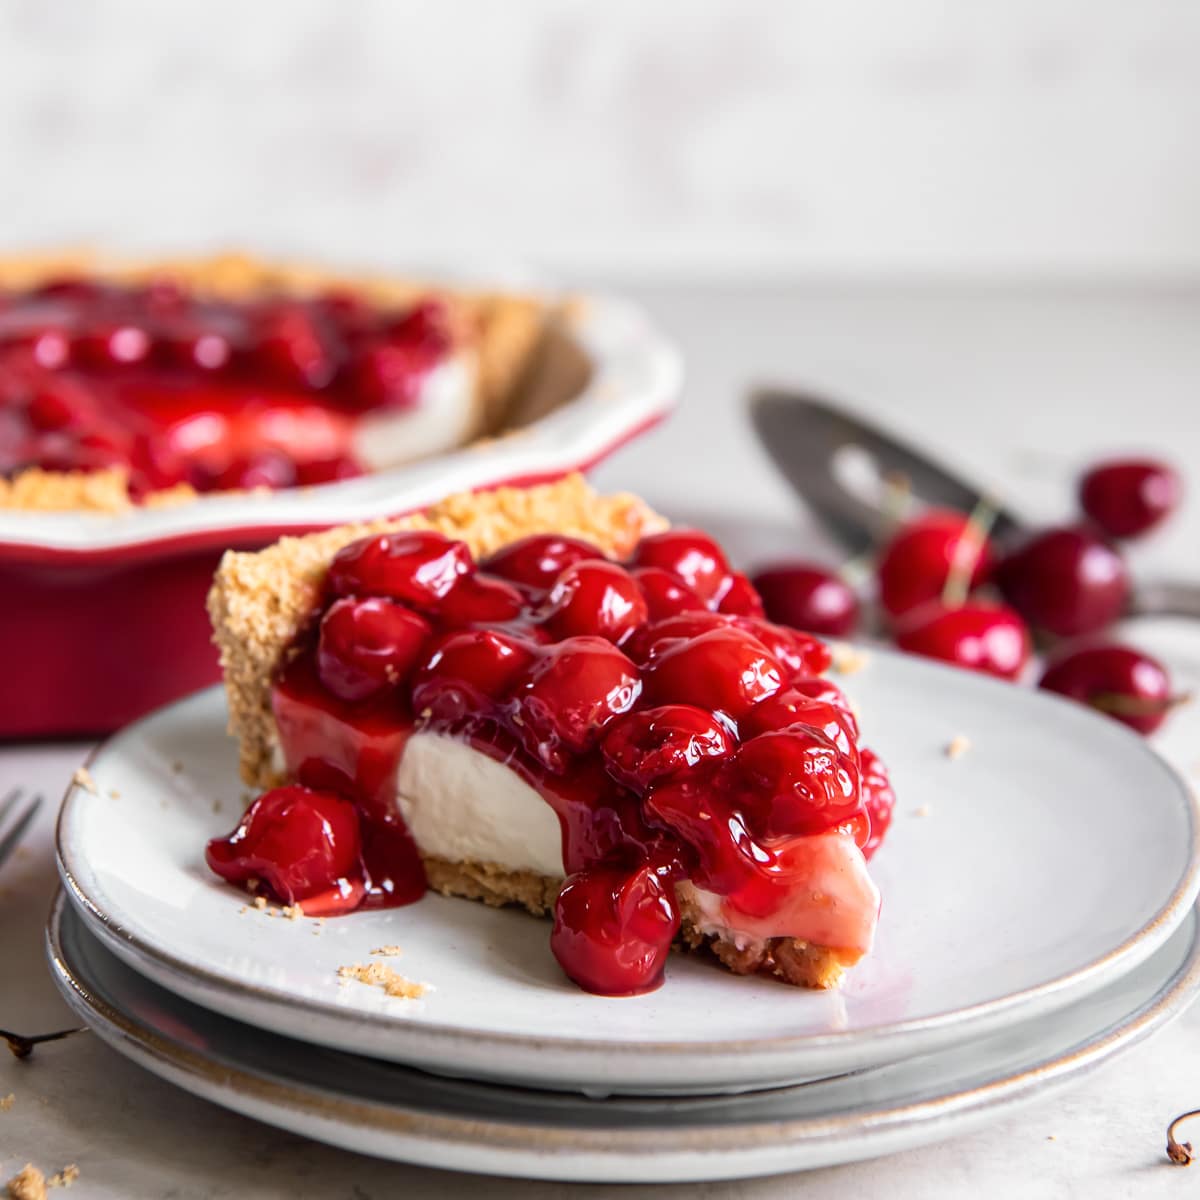 slice of cherry cream cheese pie on a plate.